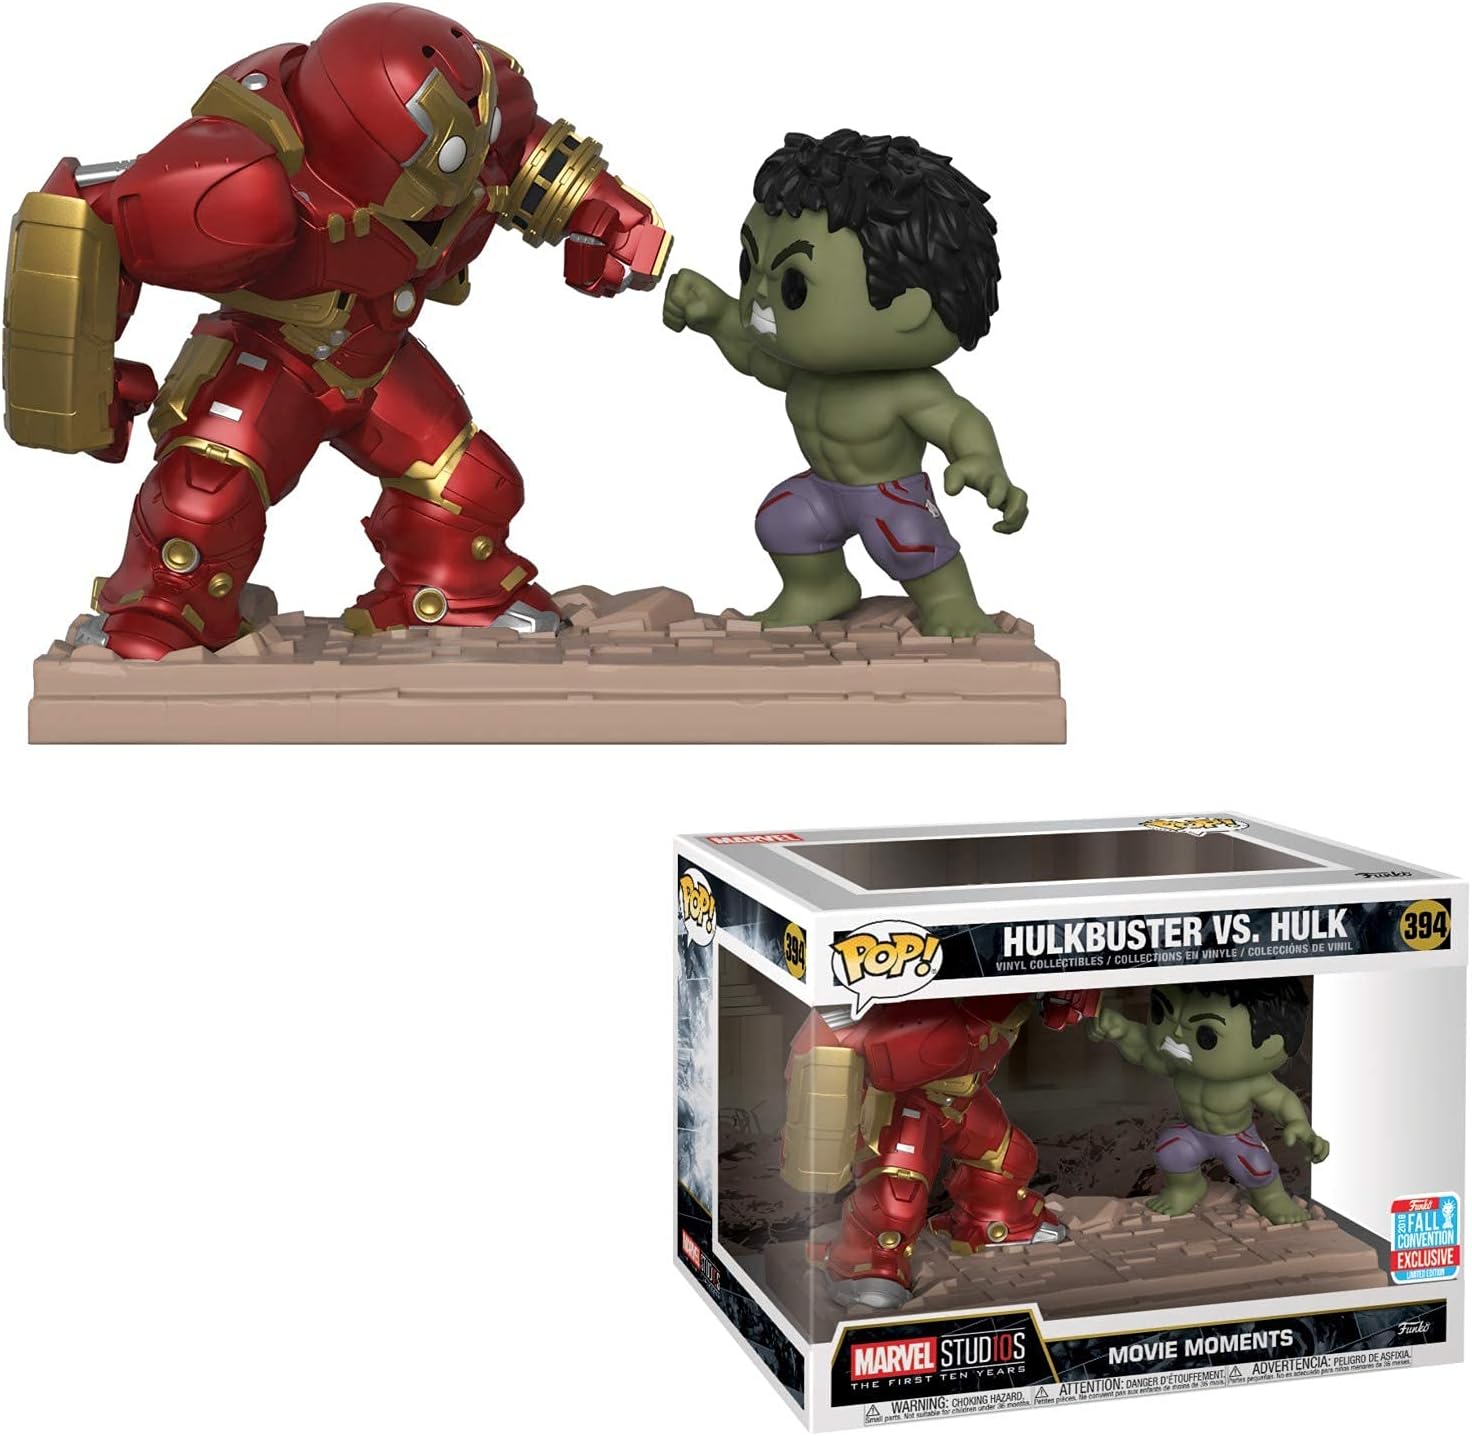 Hulkbusters VS. Hulk - #394 - Movie Moments  - Funko Pop! - Marvel -2020 Fall Convention Exclusive